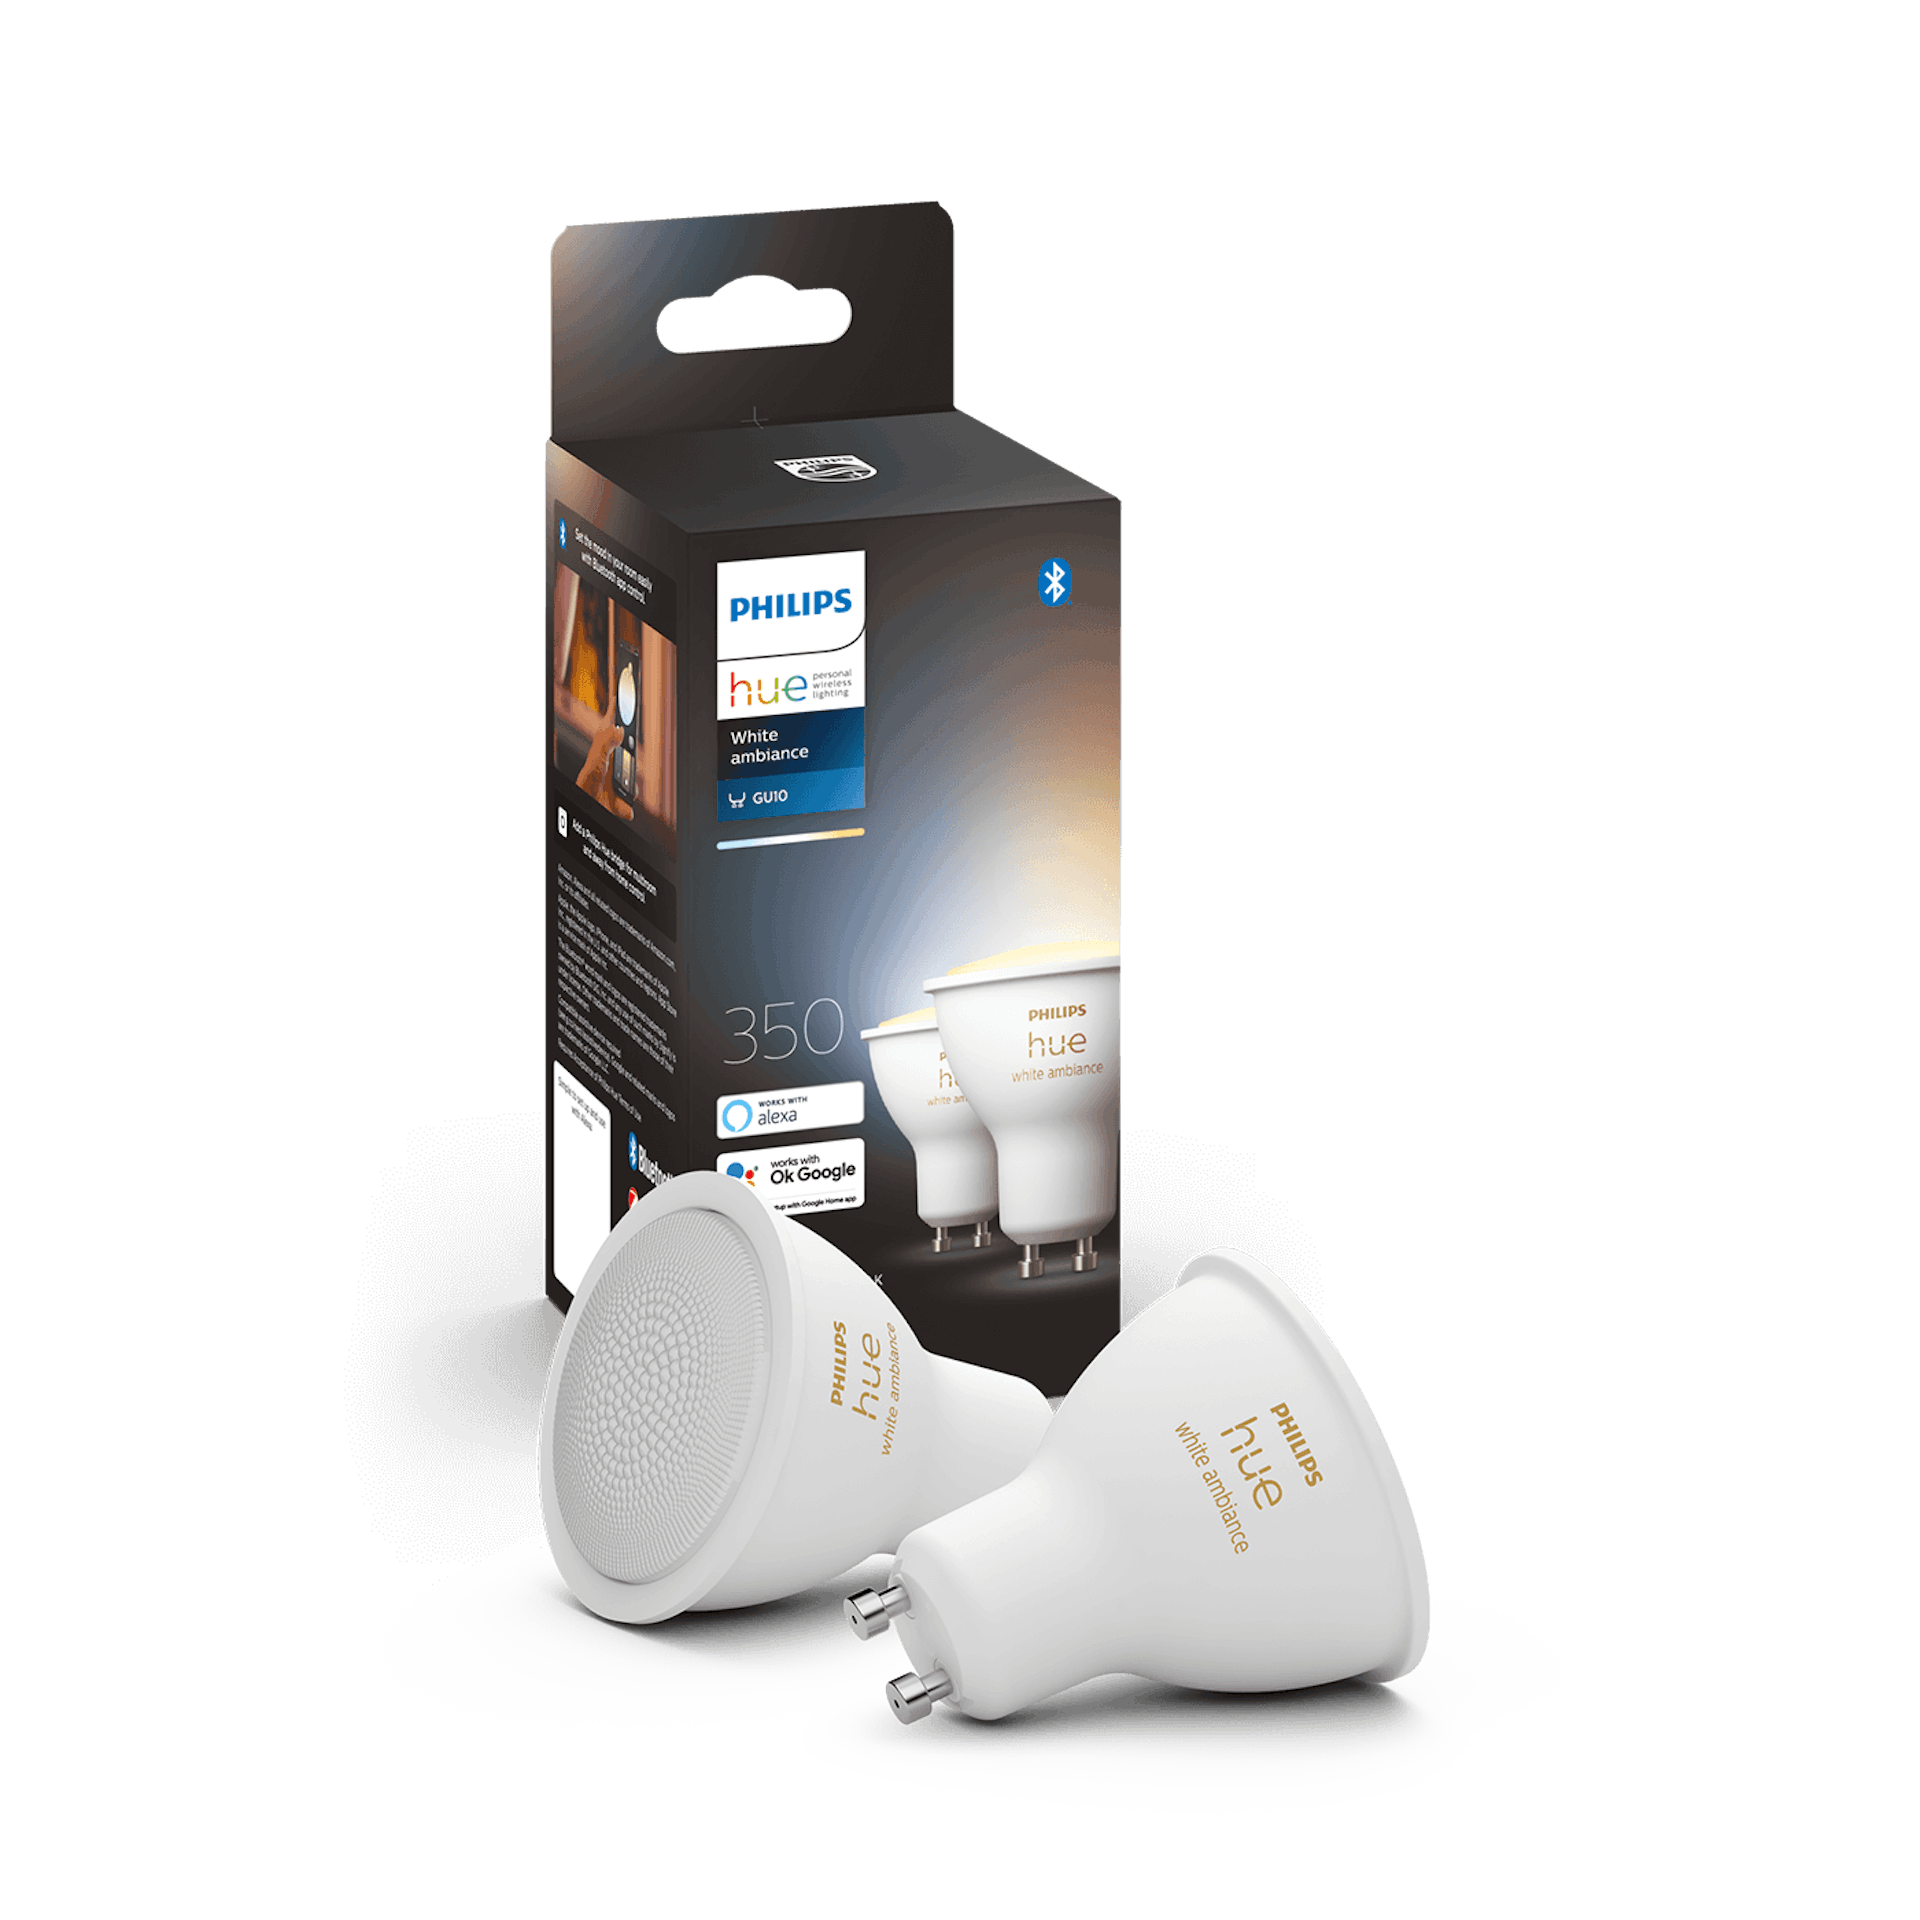 Philips Hue White Ambiance GU10 G2 (2-pack) - Details - Image